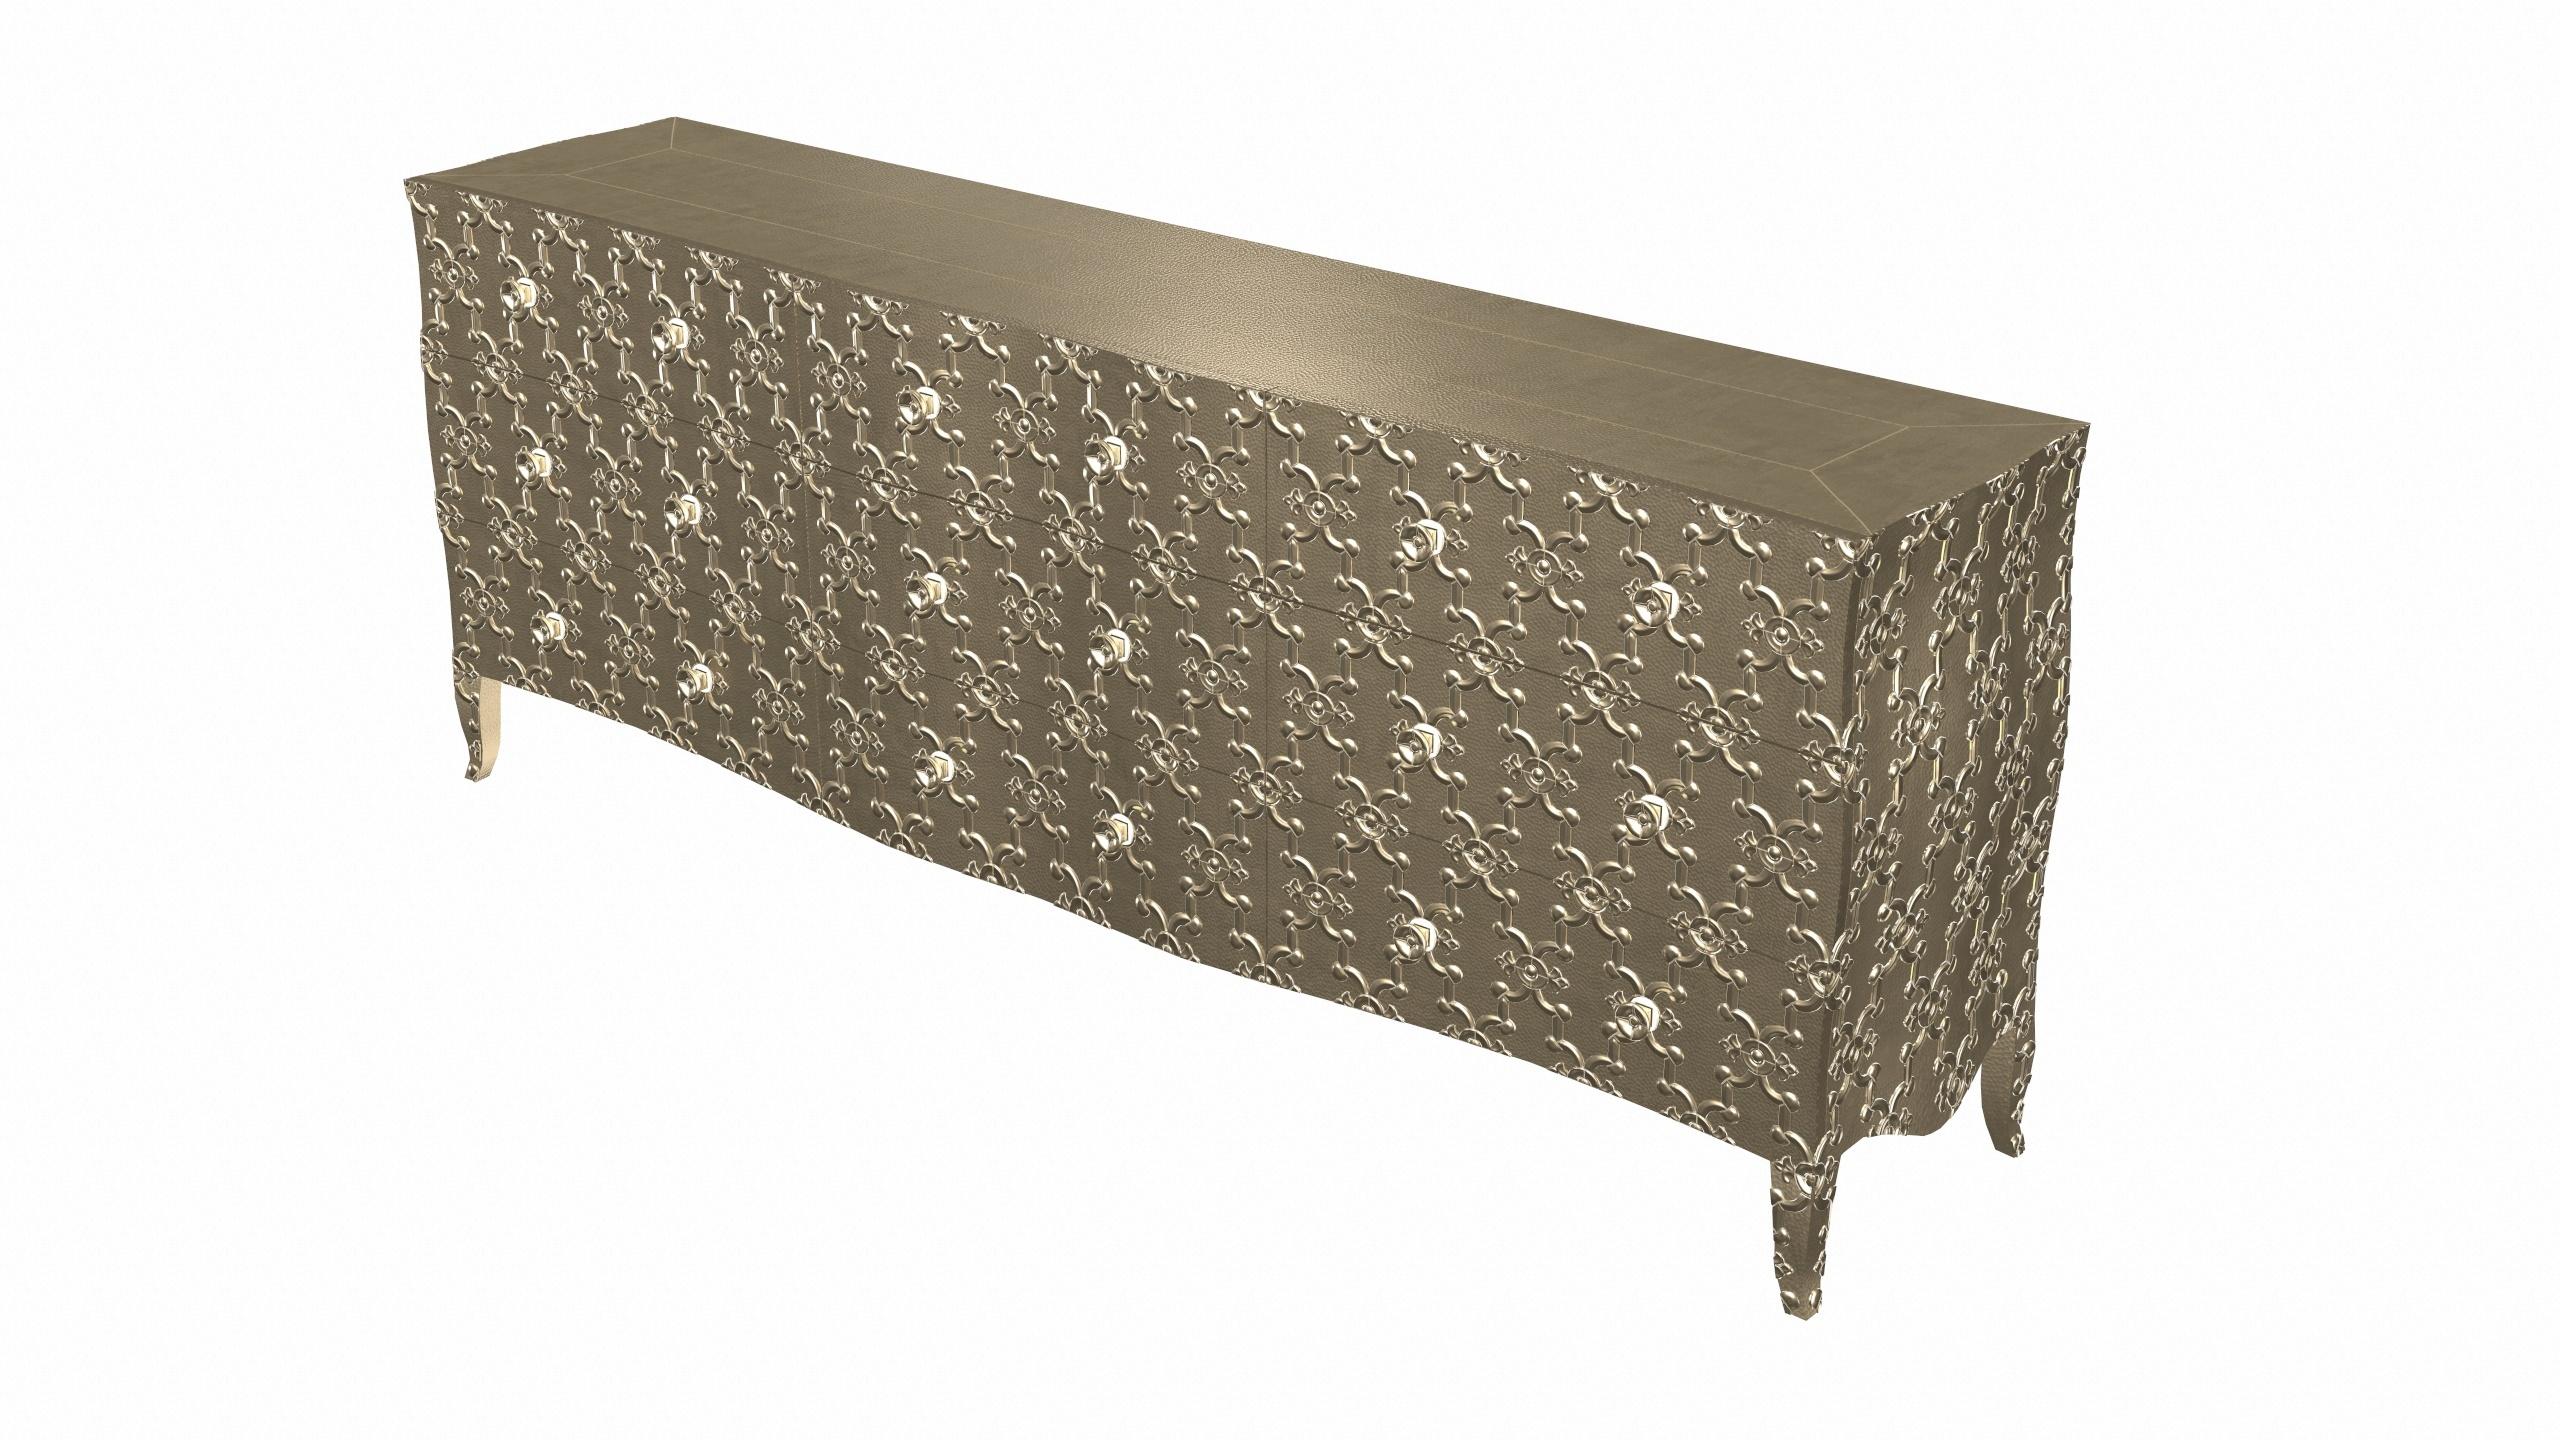 Indian Louise Art Deco Sideboard Fleur De Lis Mid. Hammered Brass by Paul Mathieu For Sale